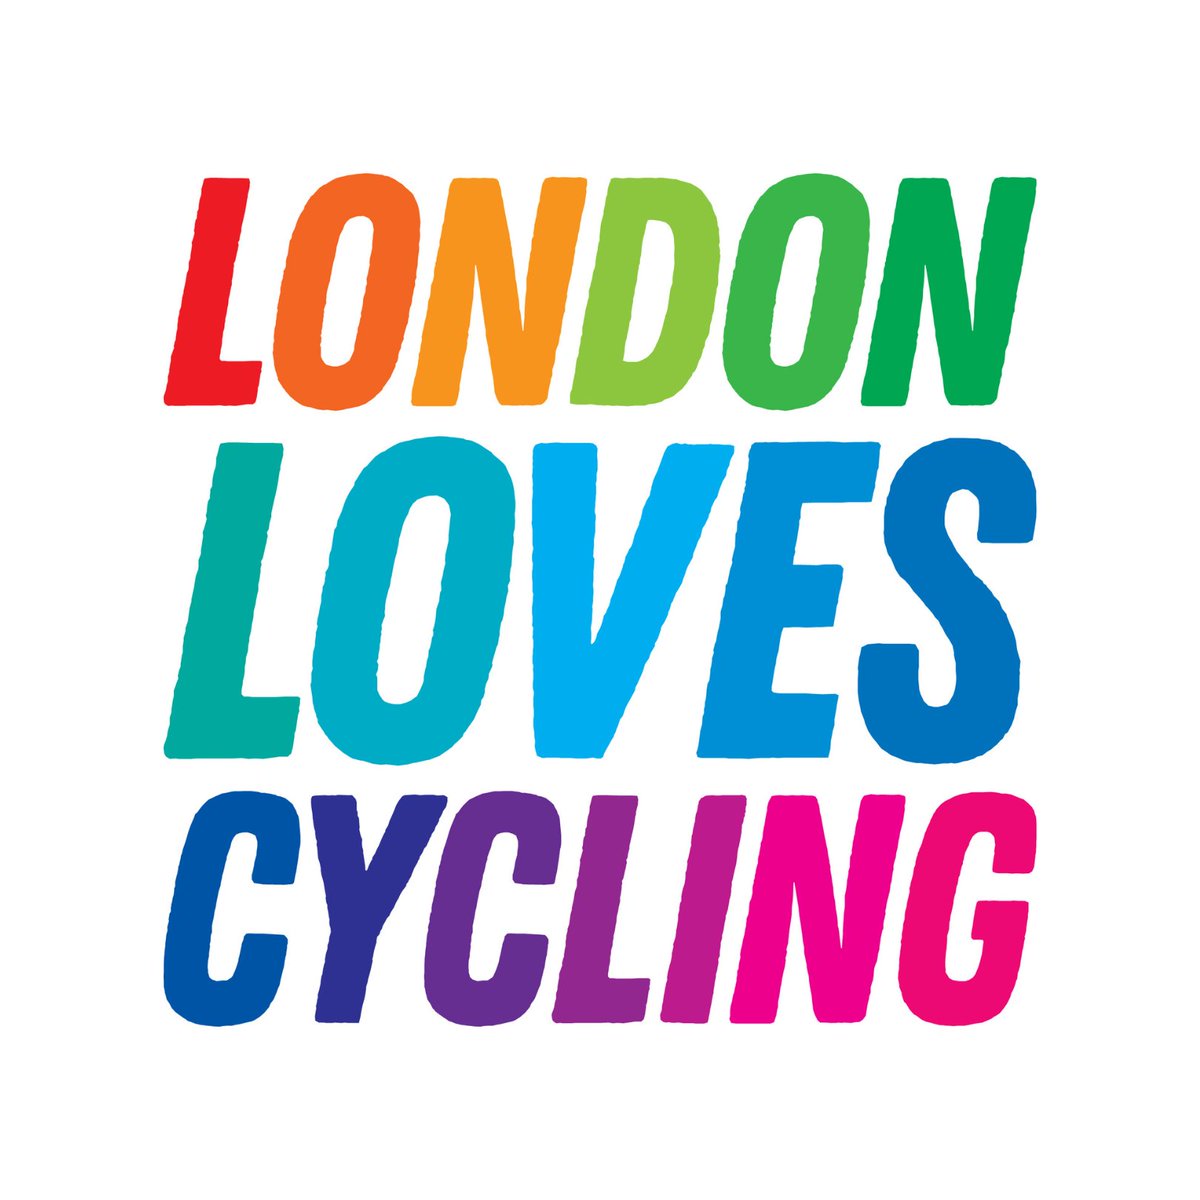 Let's make sure the next Mayor of London really gets our love for cycling! With over a million cycle journeys every day and almost half of Londoners already cycling or wanting to start, it's clear: London is all about cycling! 🚲 #Londonlovescycling